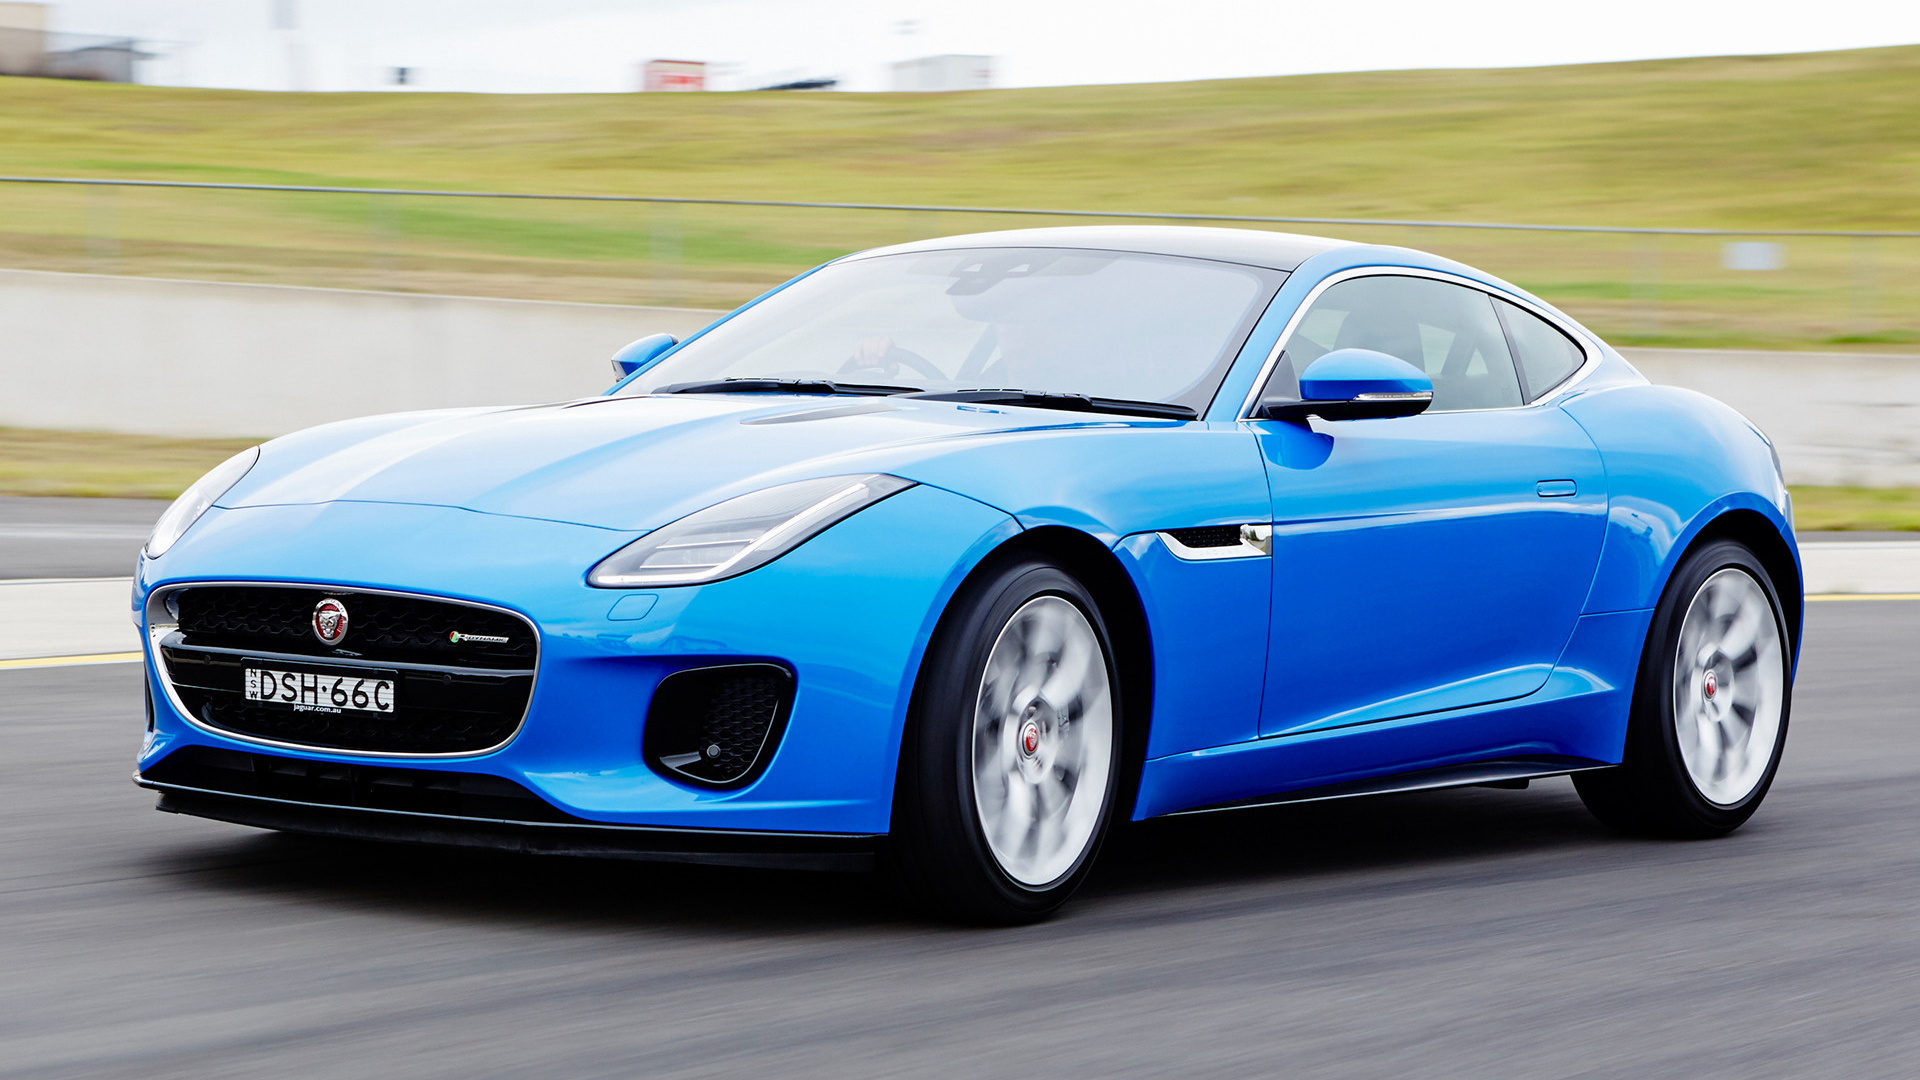 2017 Jaguar F-Type Coupe R-Dynamic (AU) - Wallpapers and ...